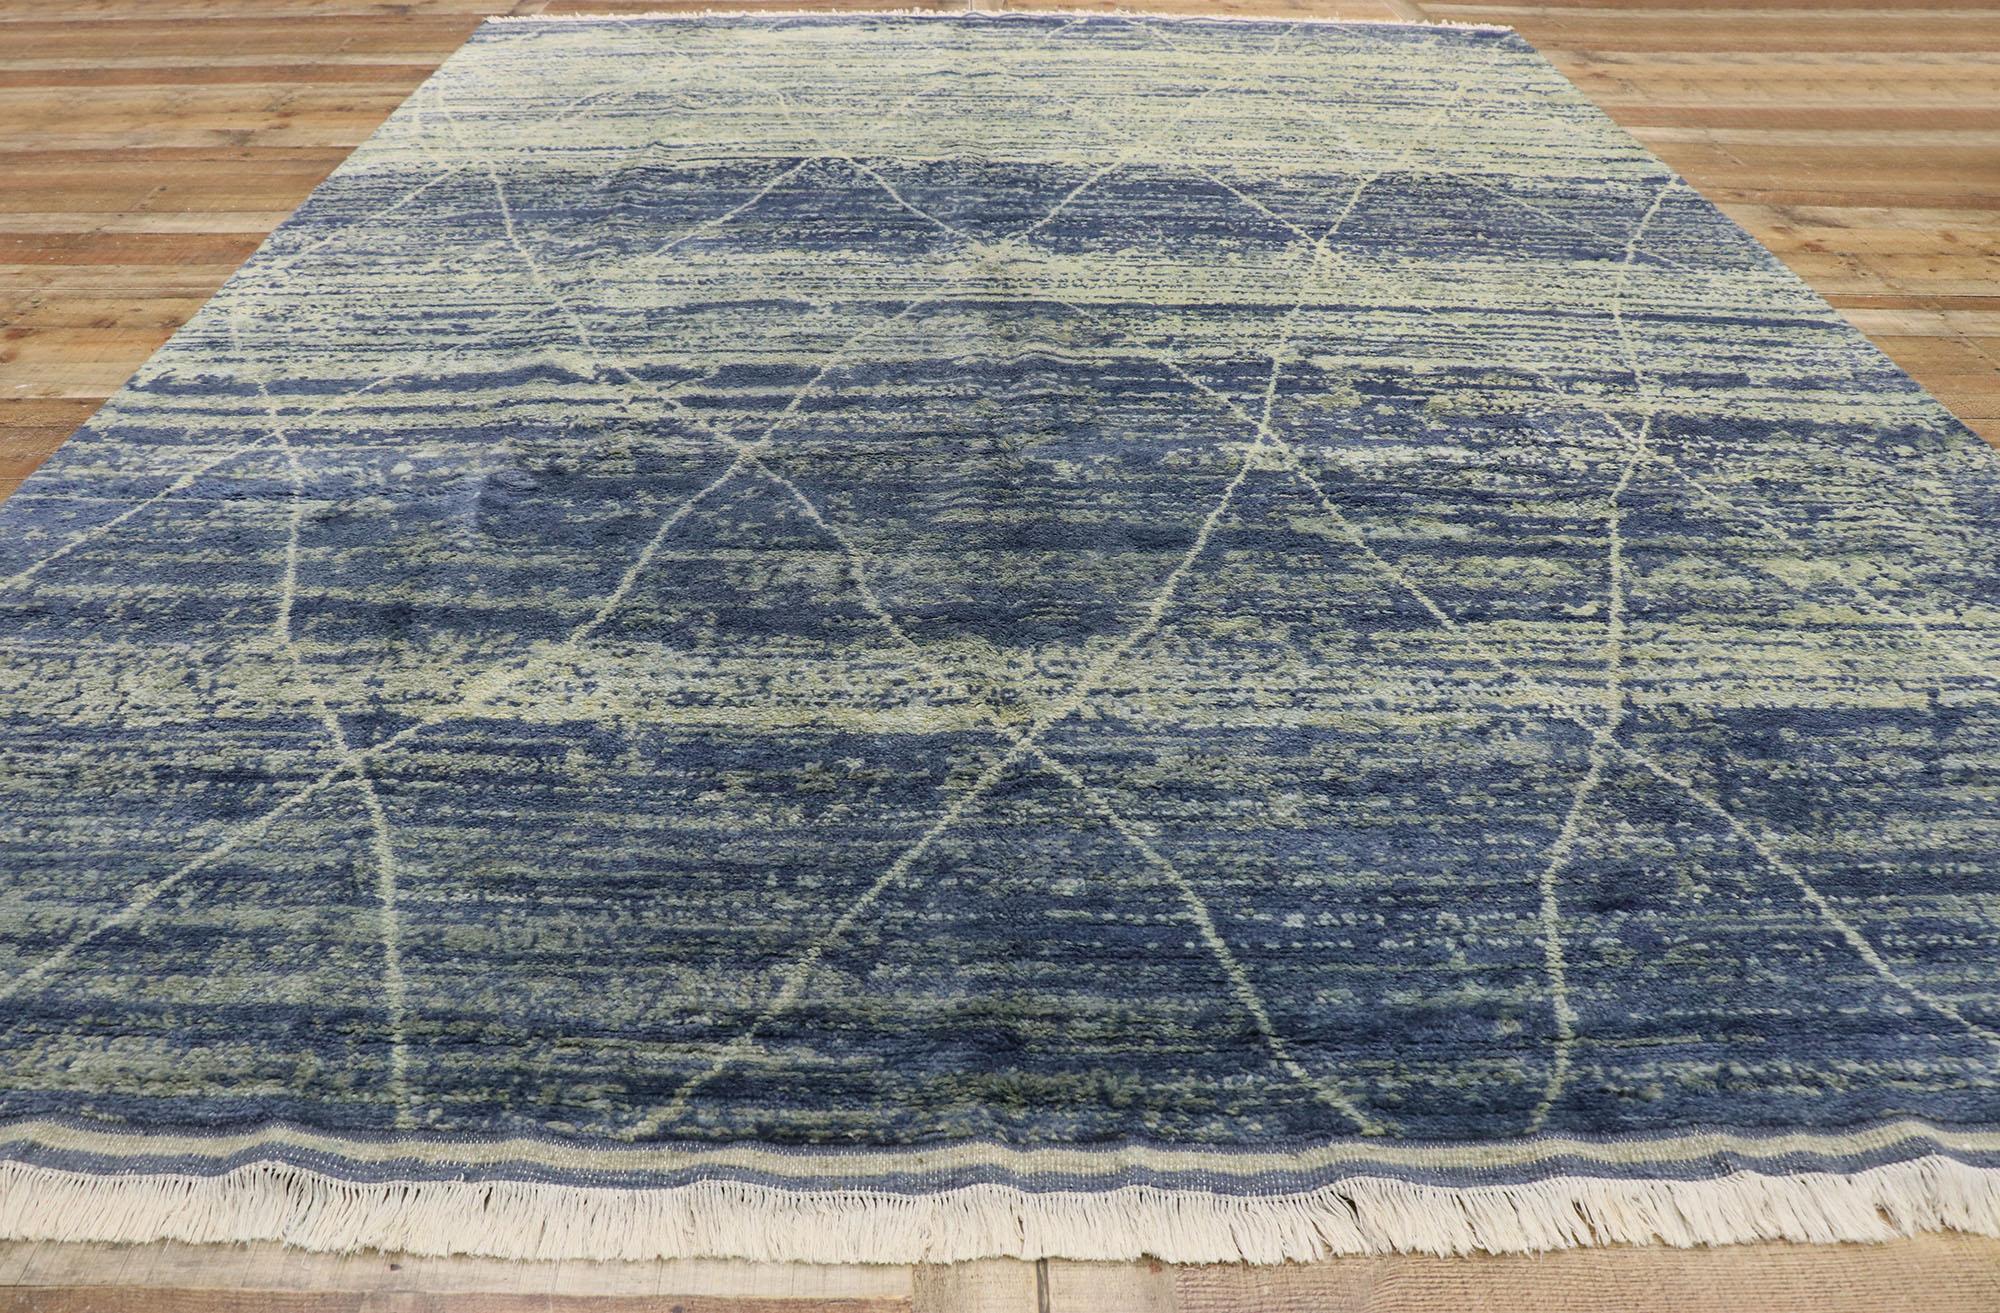 New Contemporary Moroccan Rug with Organic Modern Beach Style 2